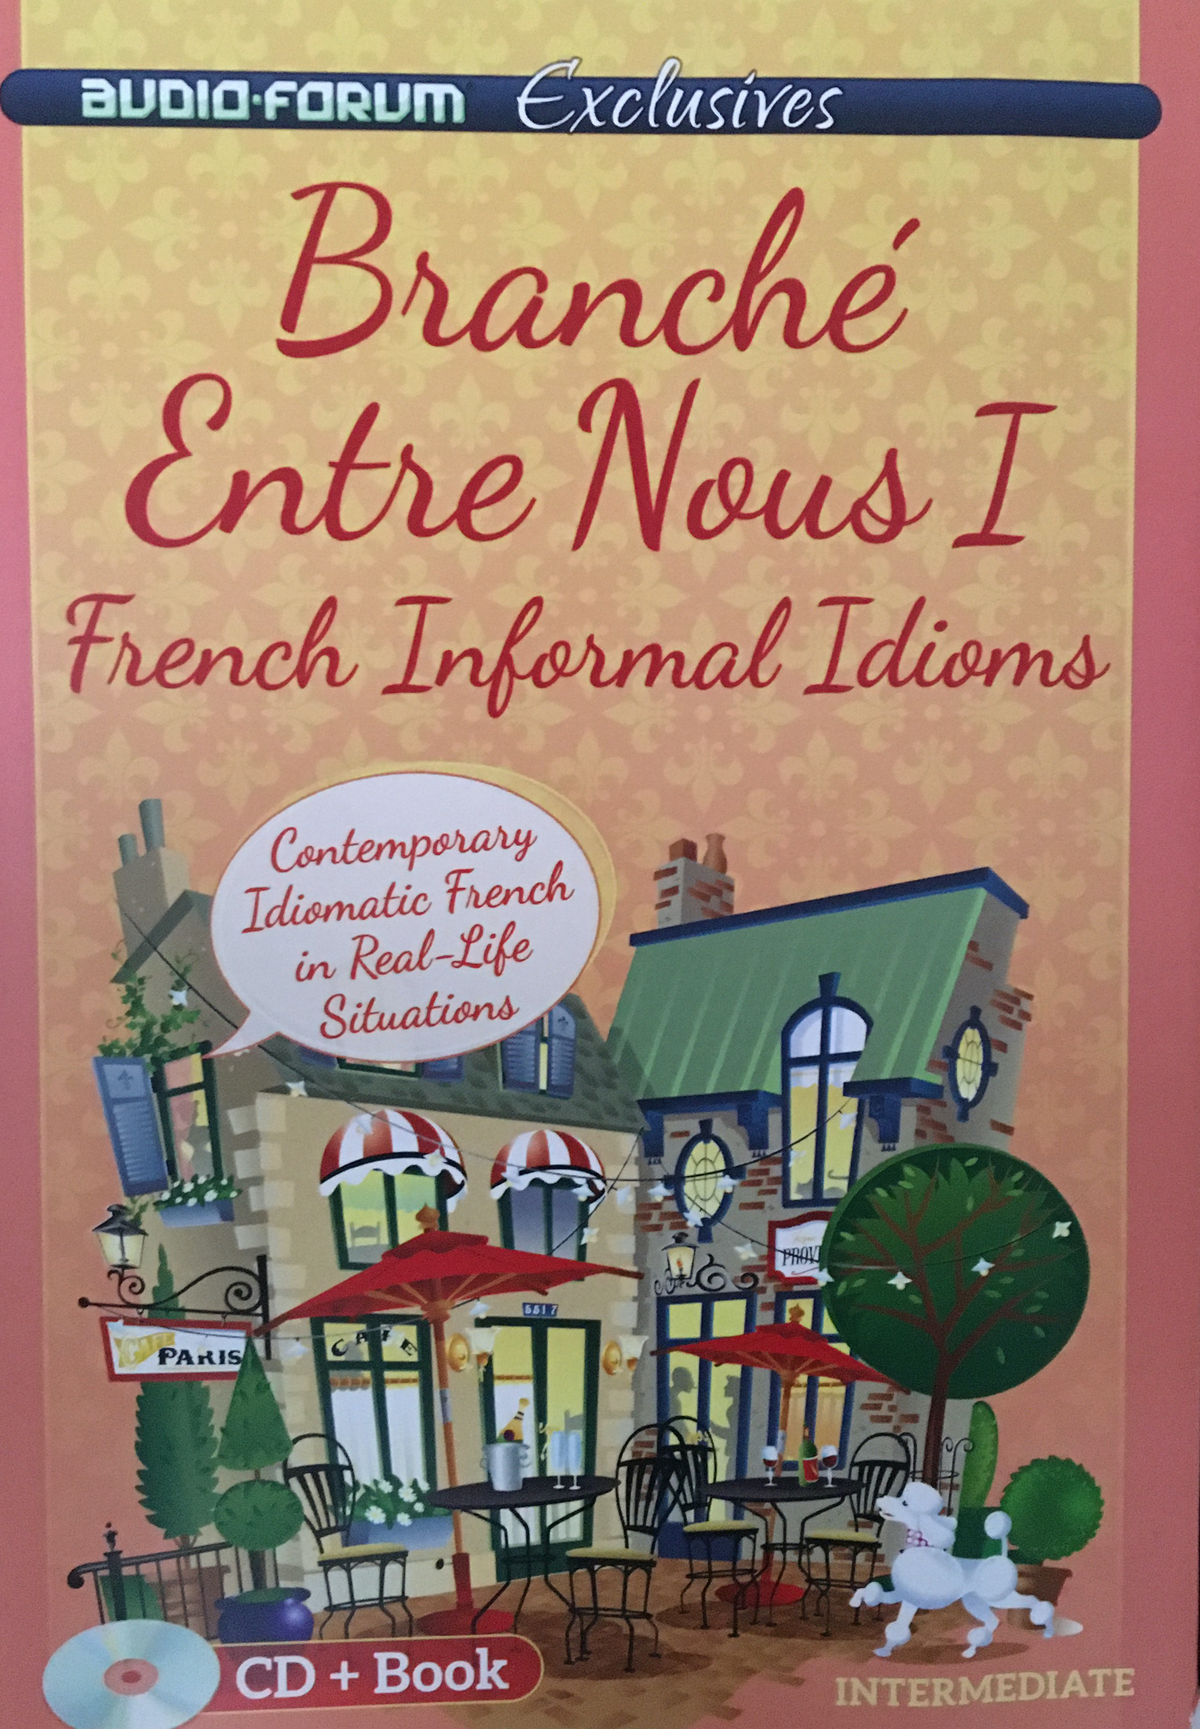 French Informal Idioms Branche Entre Nous I CD + Book Intermediate